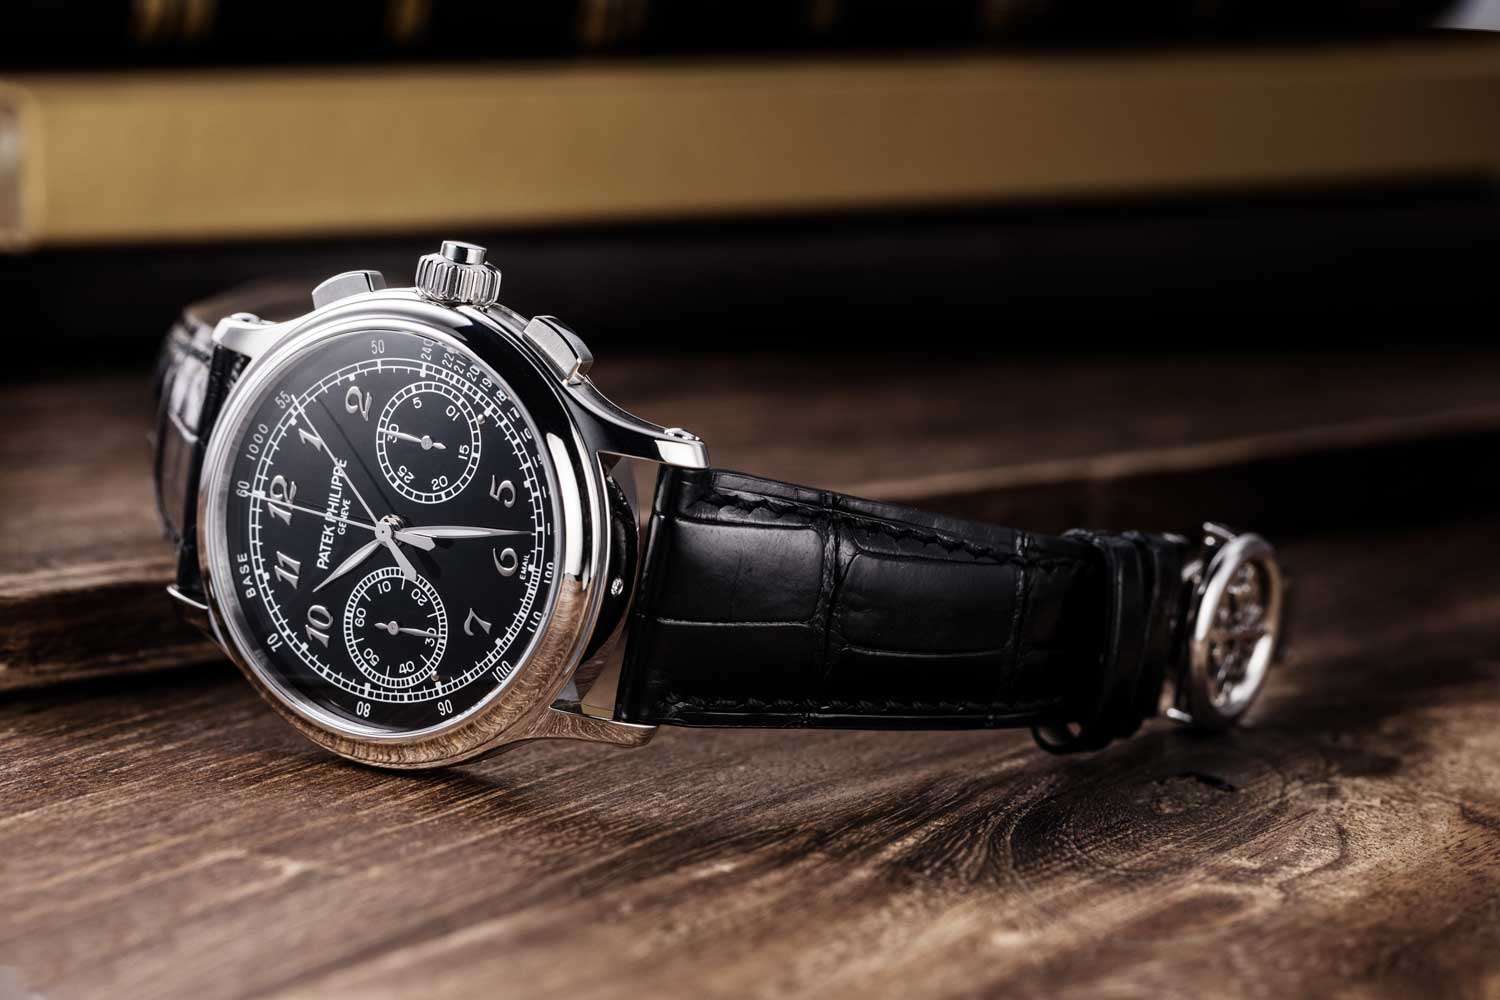 The immensely revered, Patek Philippe 5370P-001 Split-Second Chronograph with a black enamel dial and gold applied Breguet numerals; the watch was launched in 2015 (©Revolution)